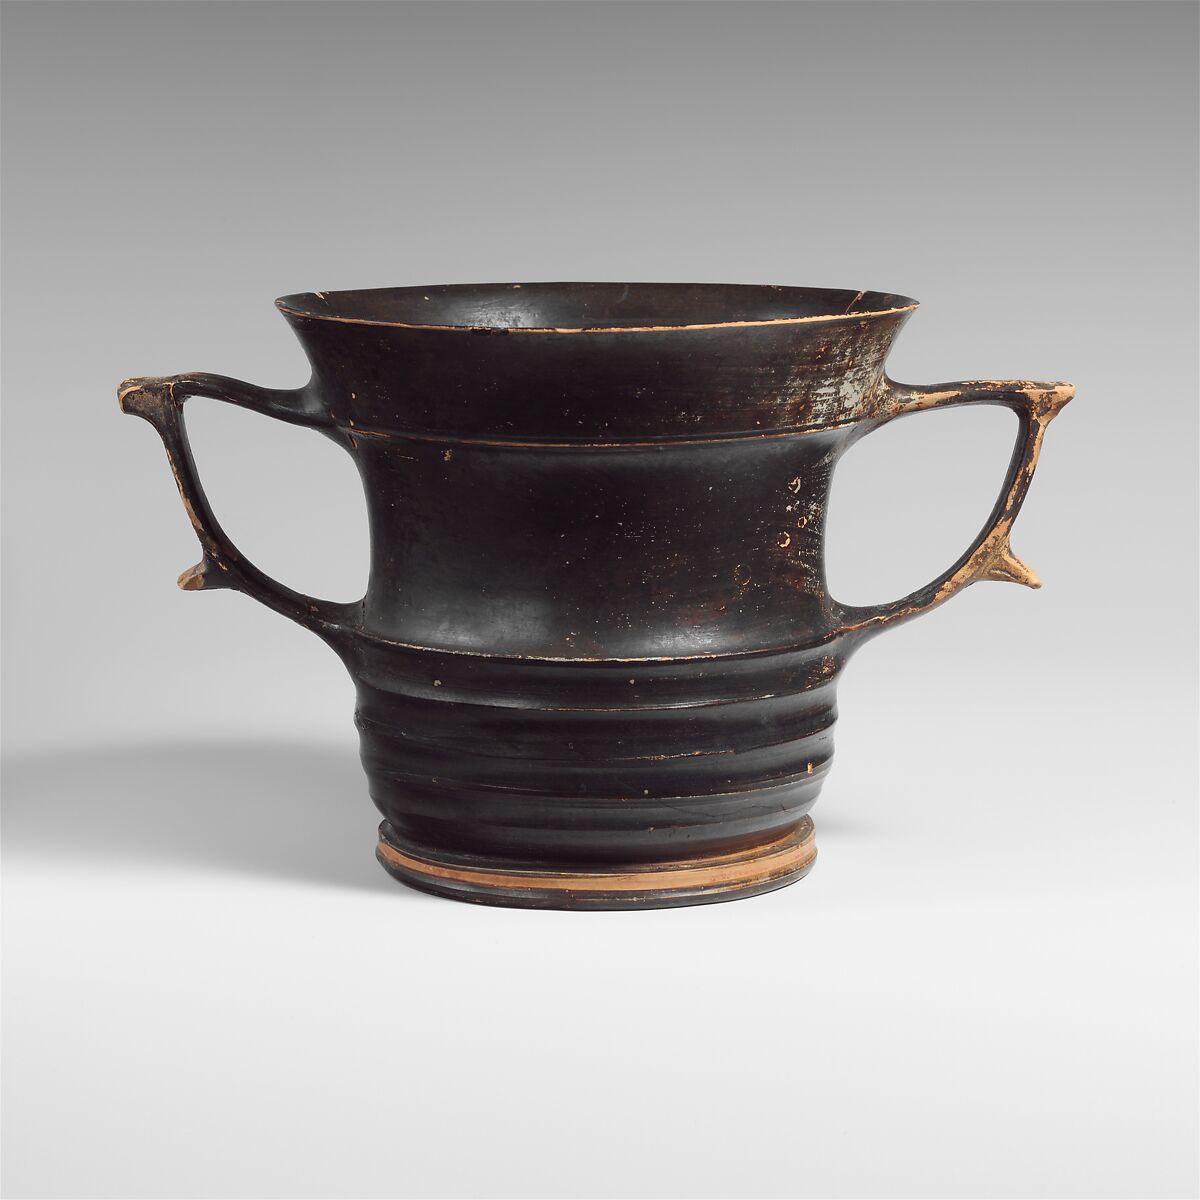 Terracotta kantharos: karchesion (deep cylindrical drinking cup), Terracotta, Greek, Attic or Boeotian 